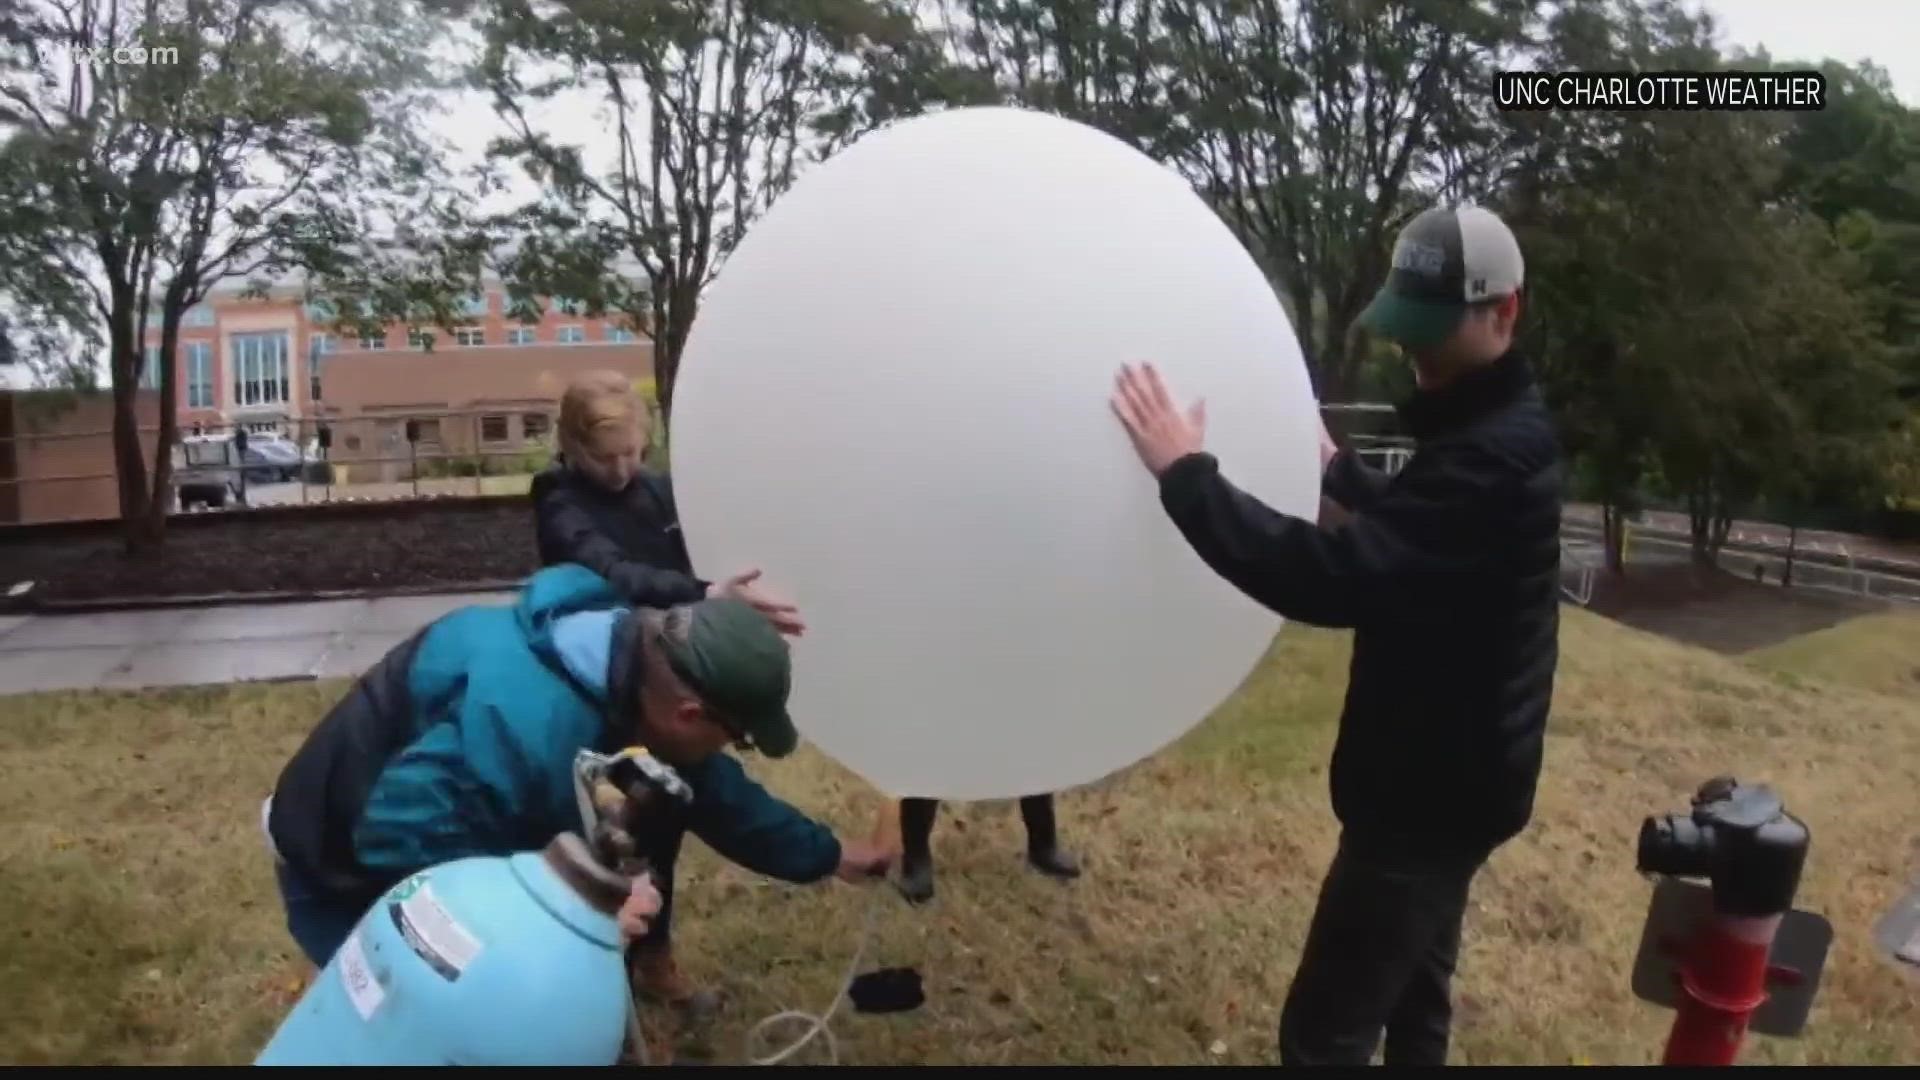 Weather balloons are more common than you think.